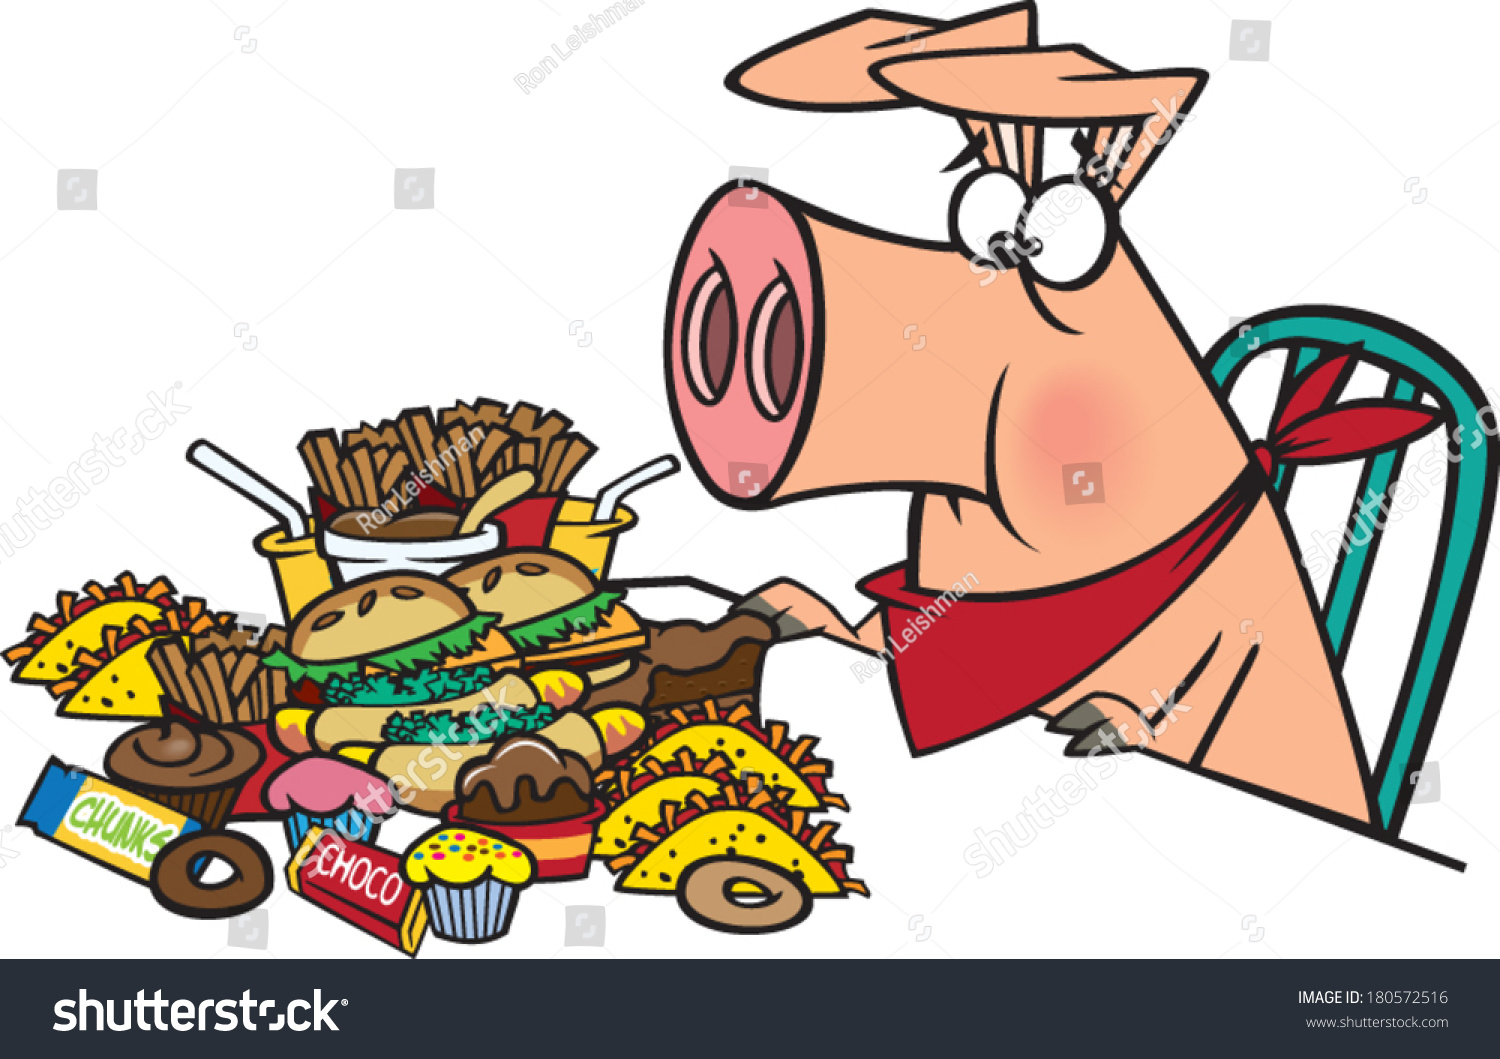 clipart pig eating - photo #20